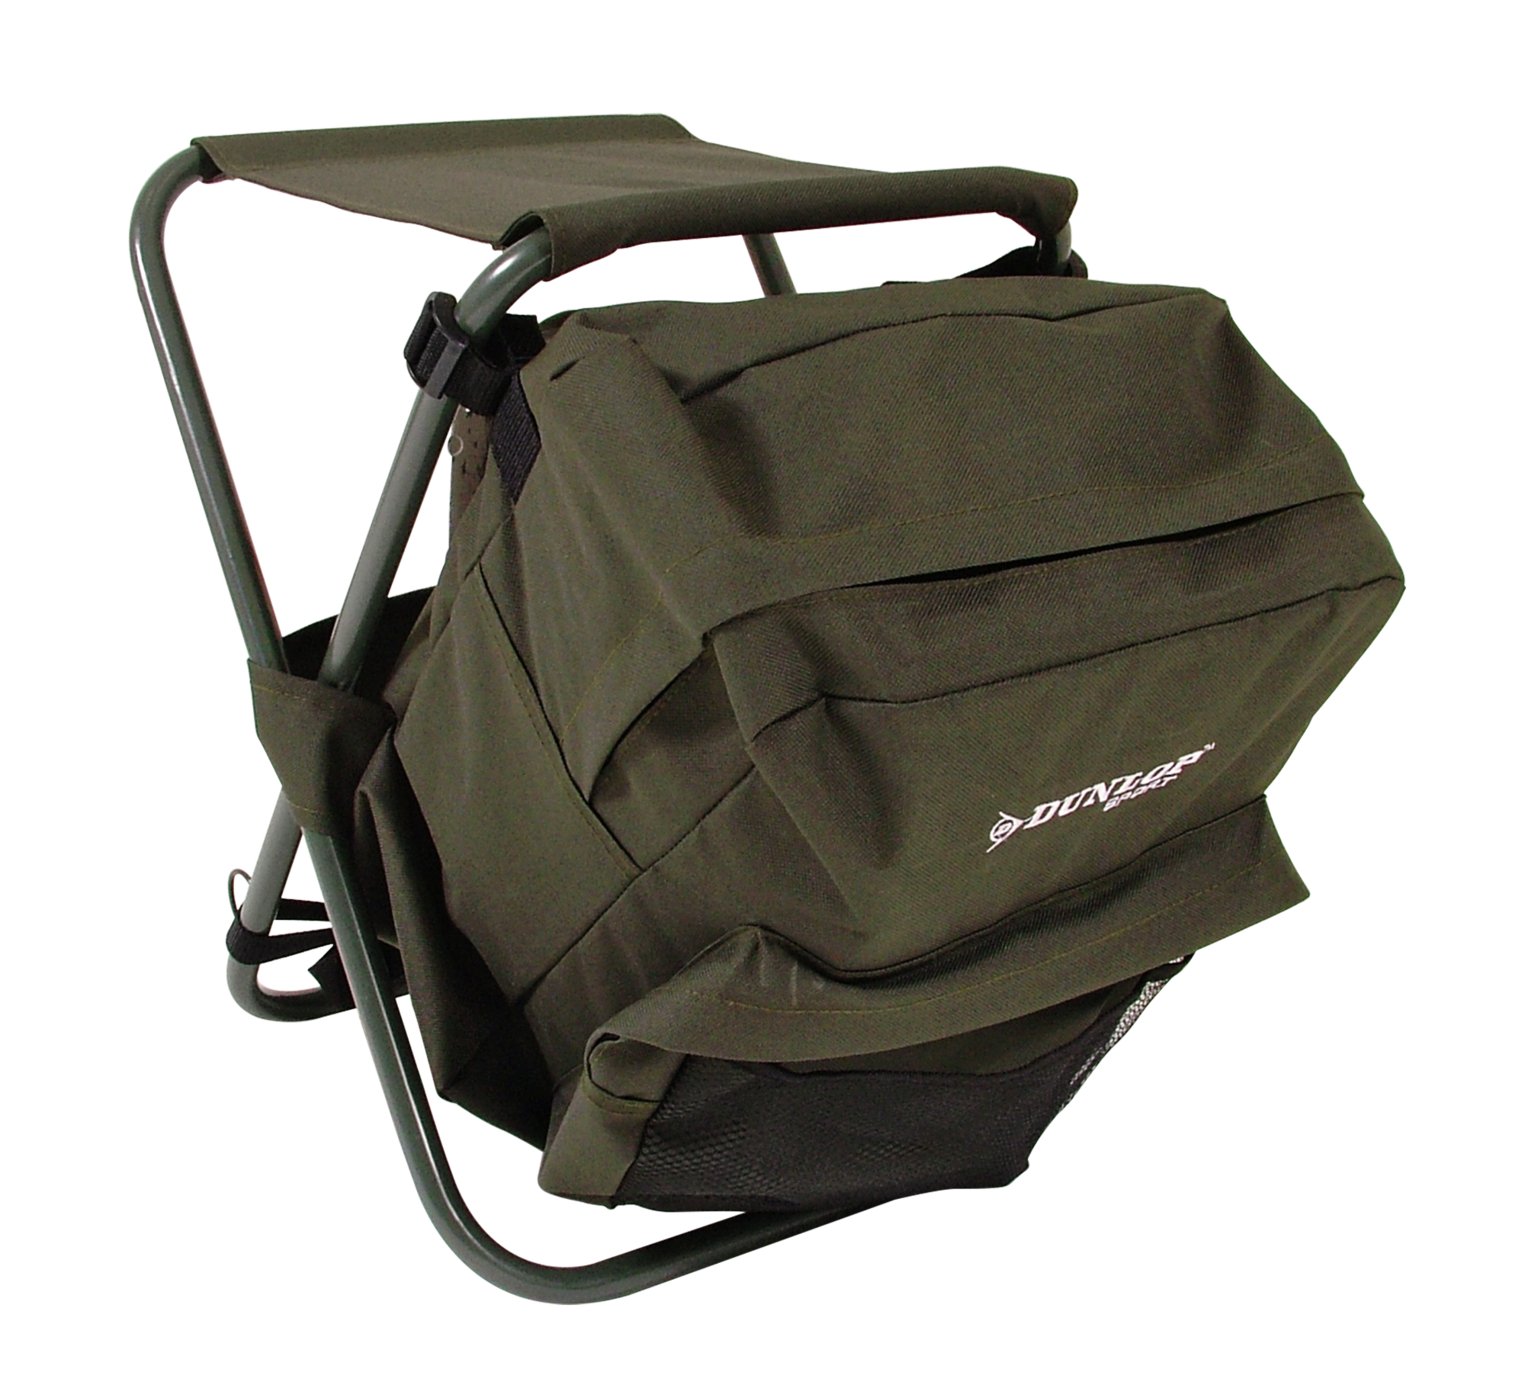 Dunlop Fishing Stool with Backpack